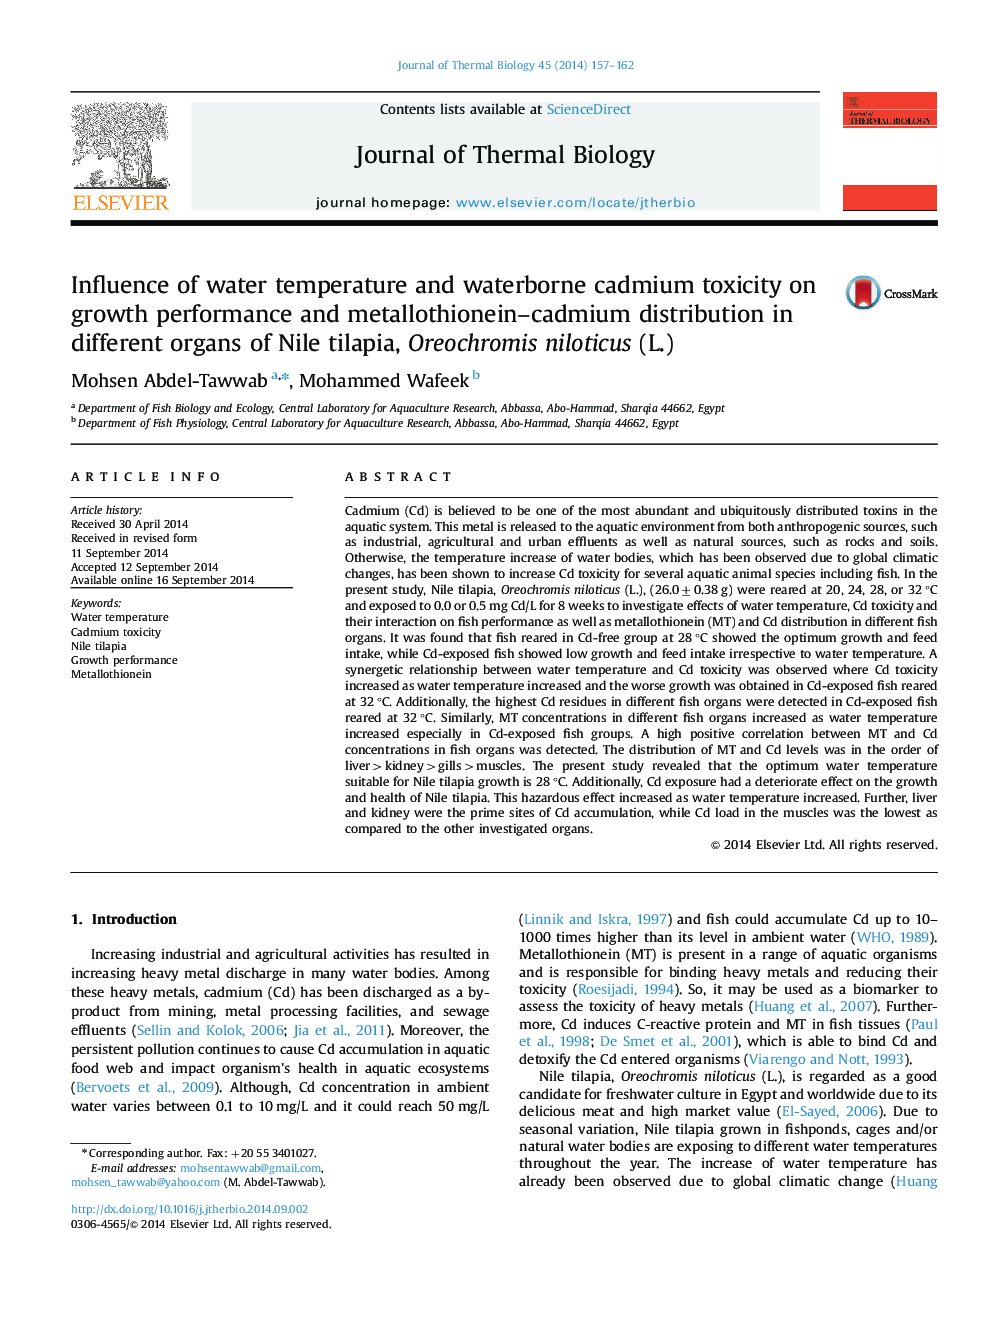 Influence of water temperature and waterborne cadmium toxicity on growth performance and metallothionein–cadmium distribution in different organs of Nile tilapia, Oreochromis niloticus (L.)